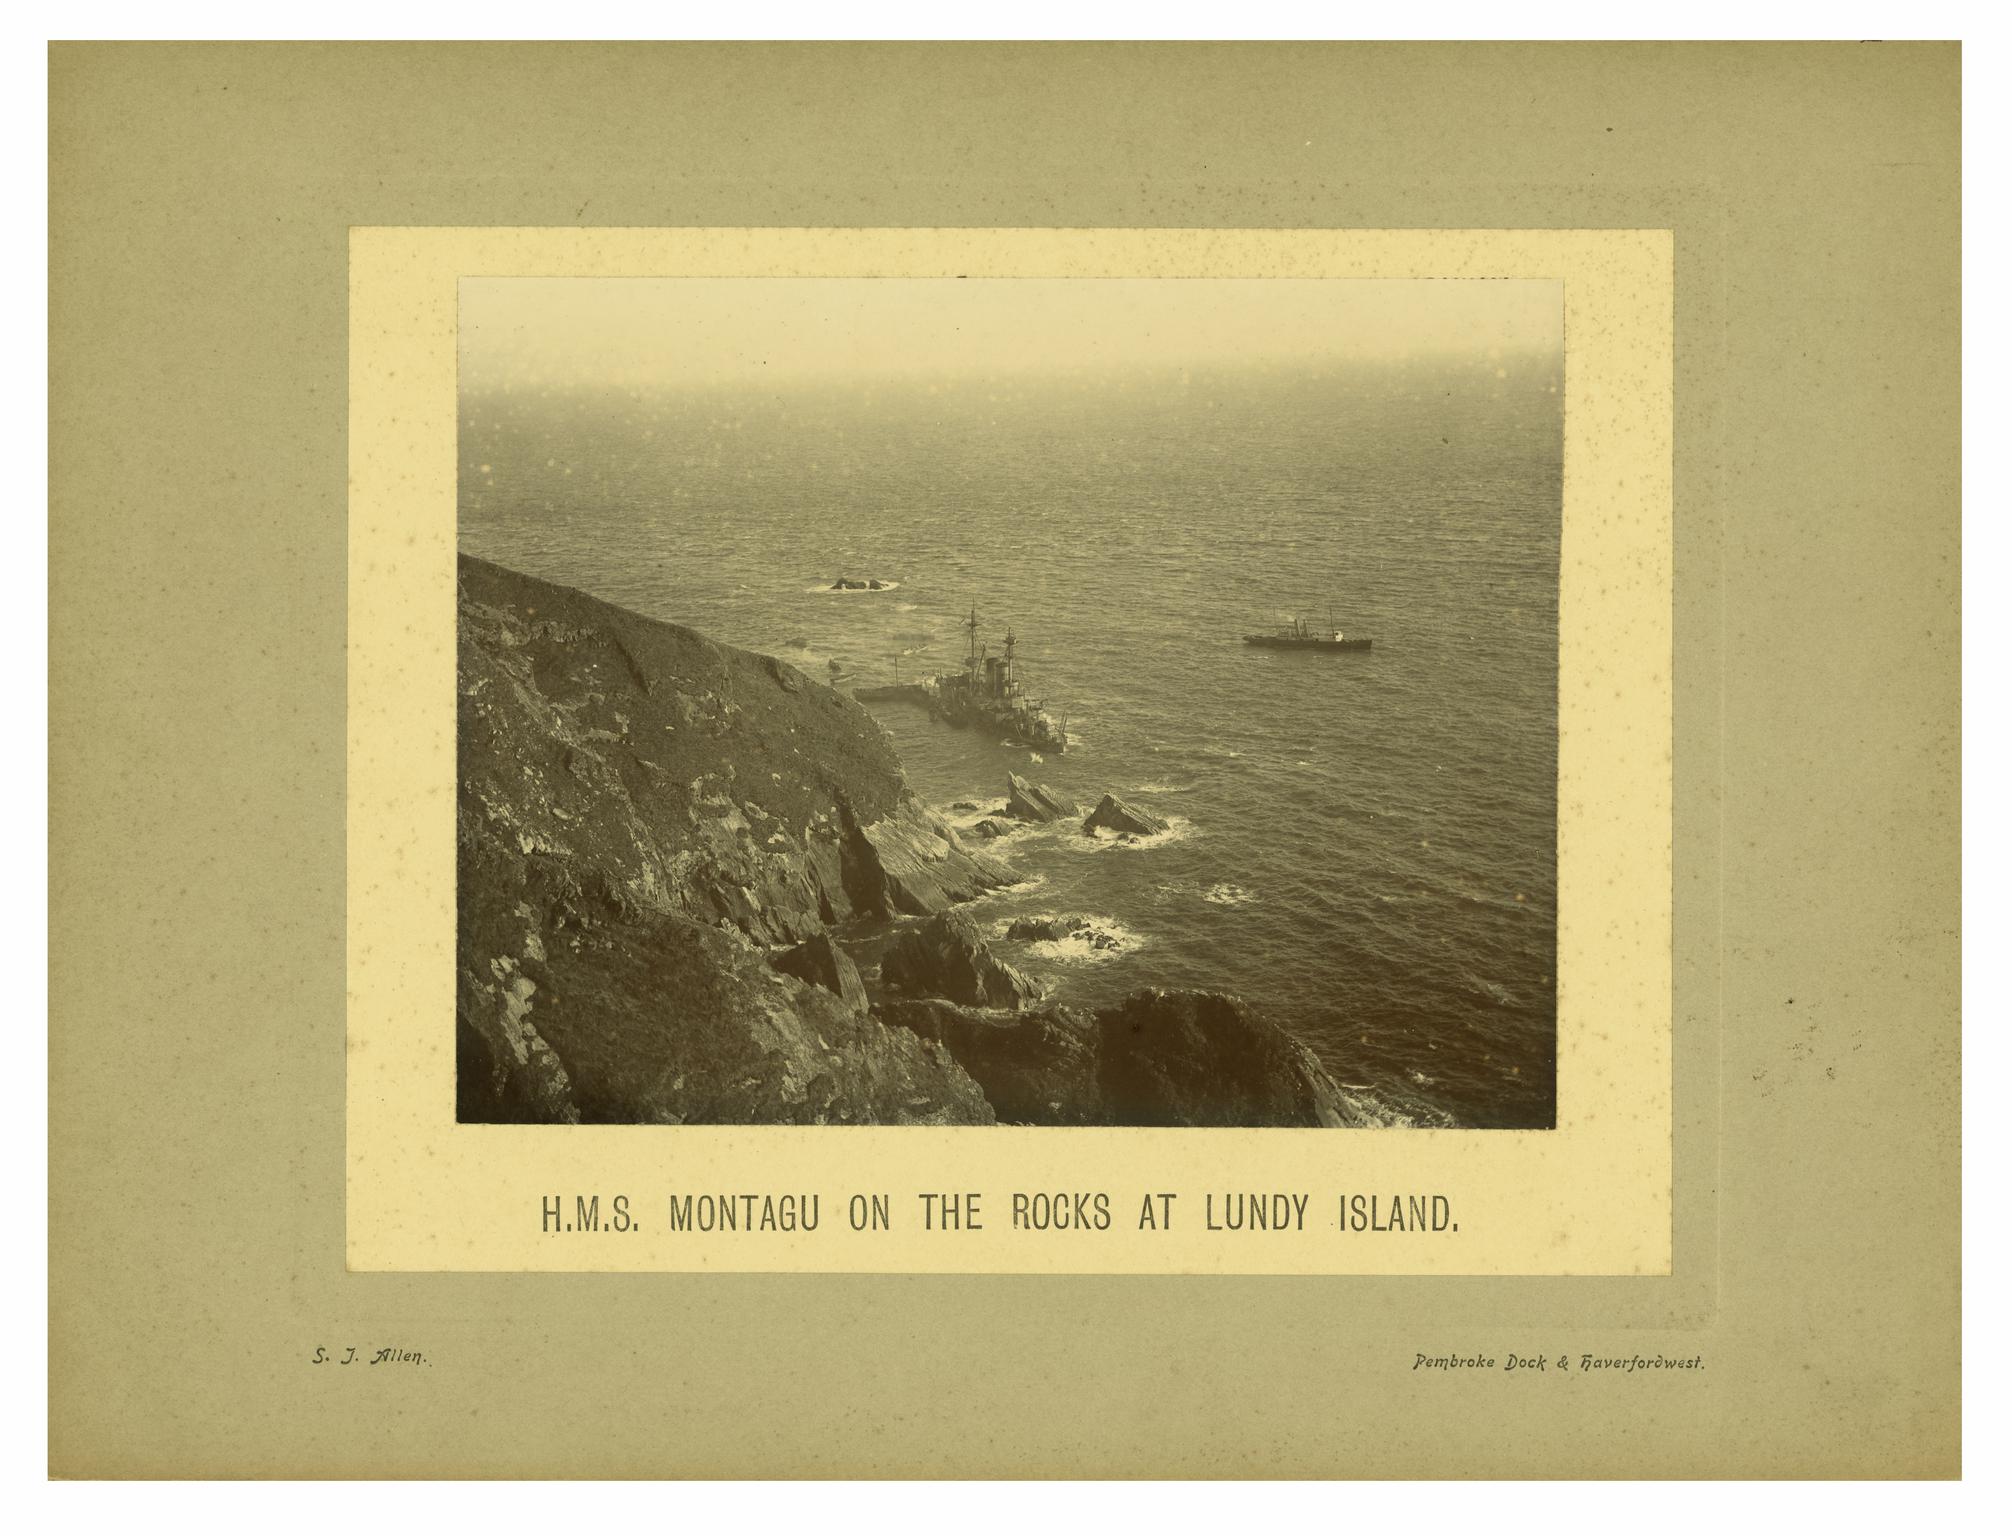 H.M.S. MONTAGU on the Rocks at Lundy Island (photograph)